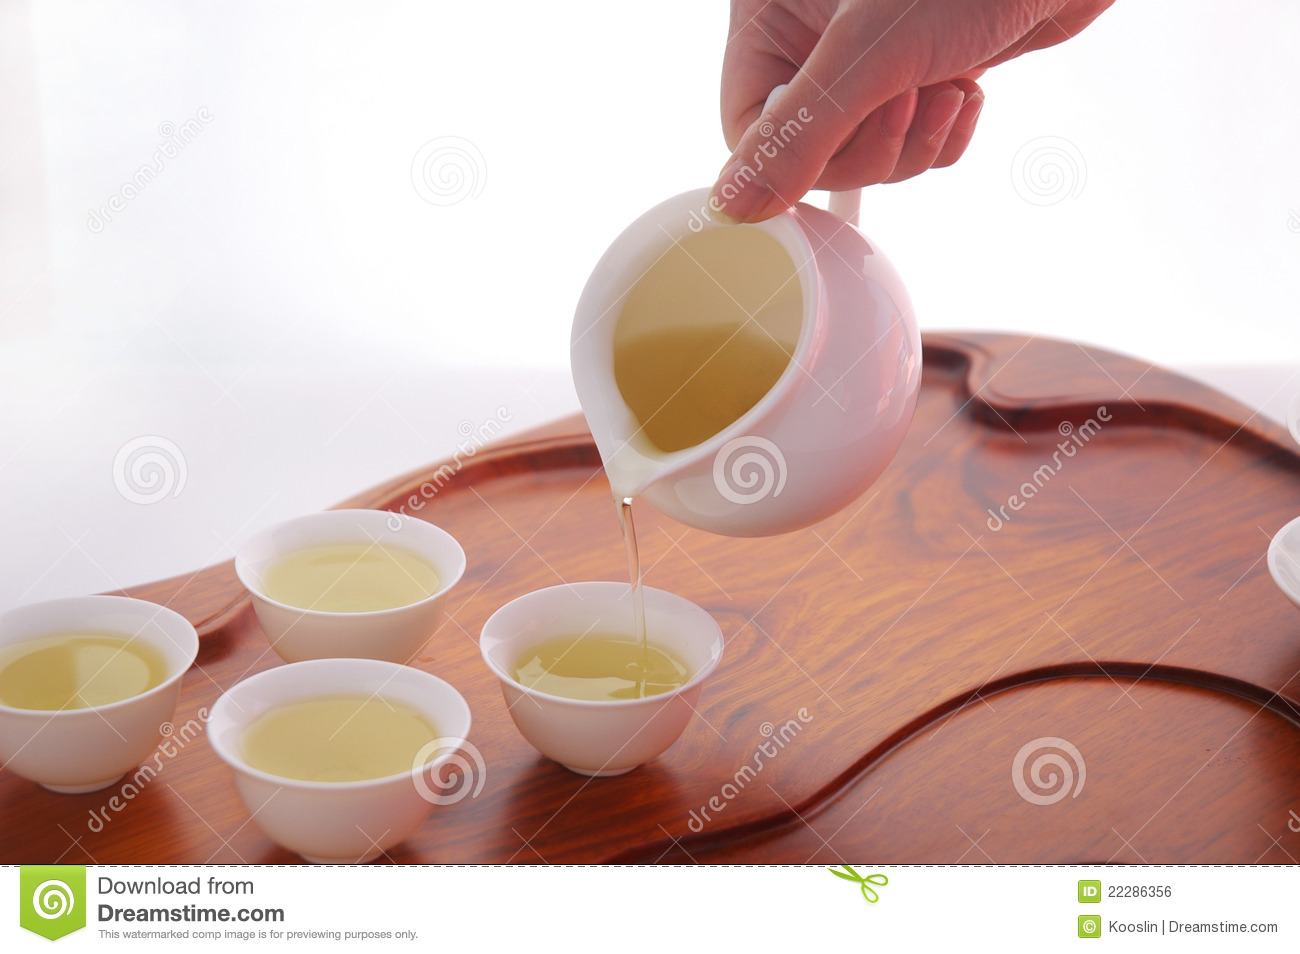 Pouring Tea Royalty Free Stock Image   Image  22286356